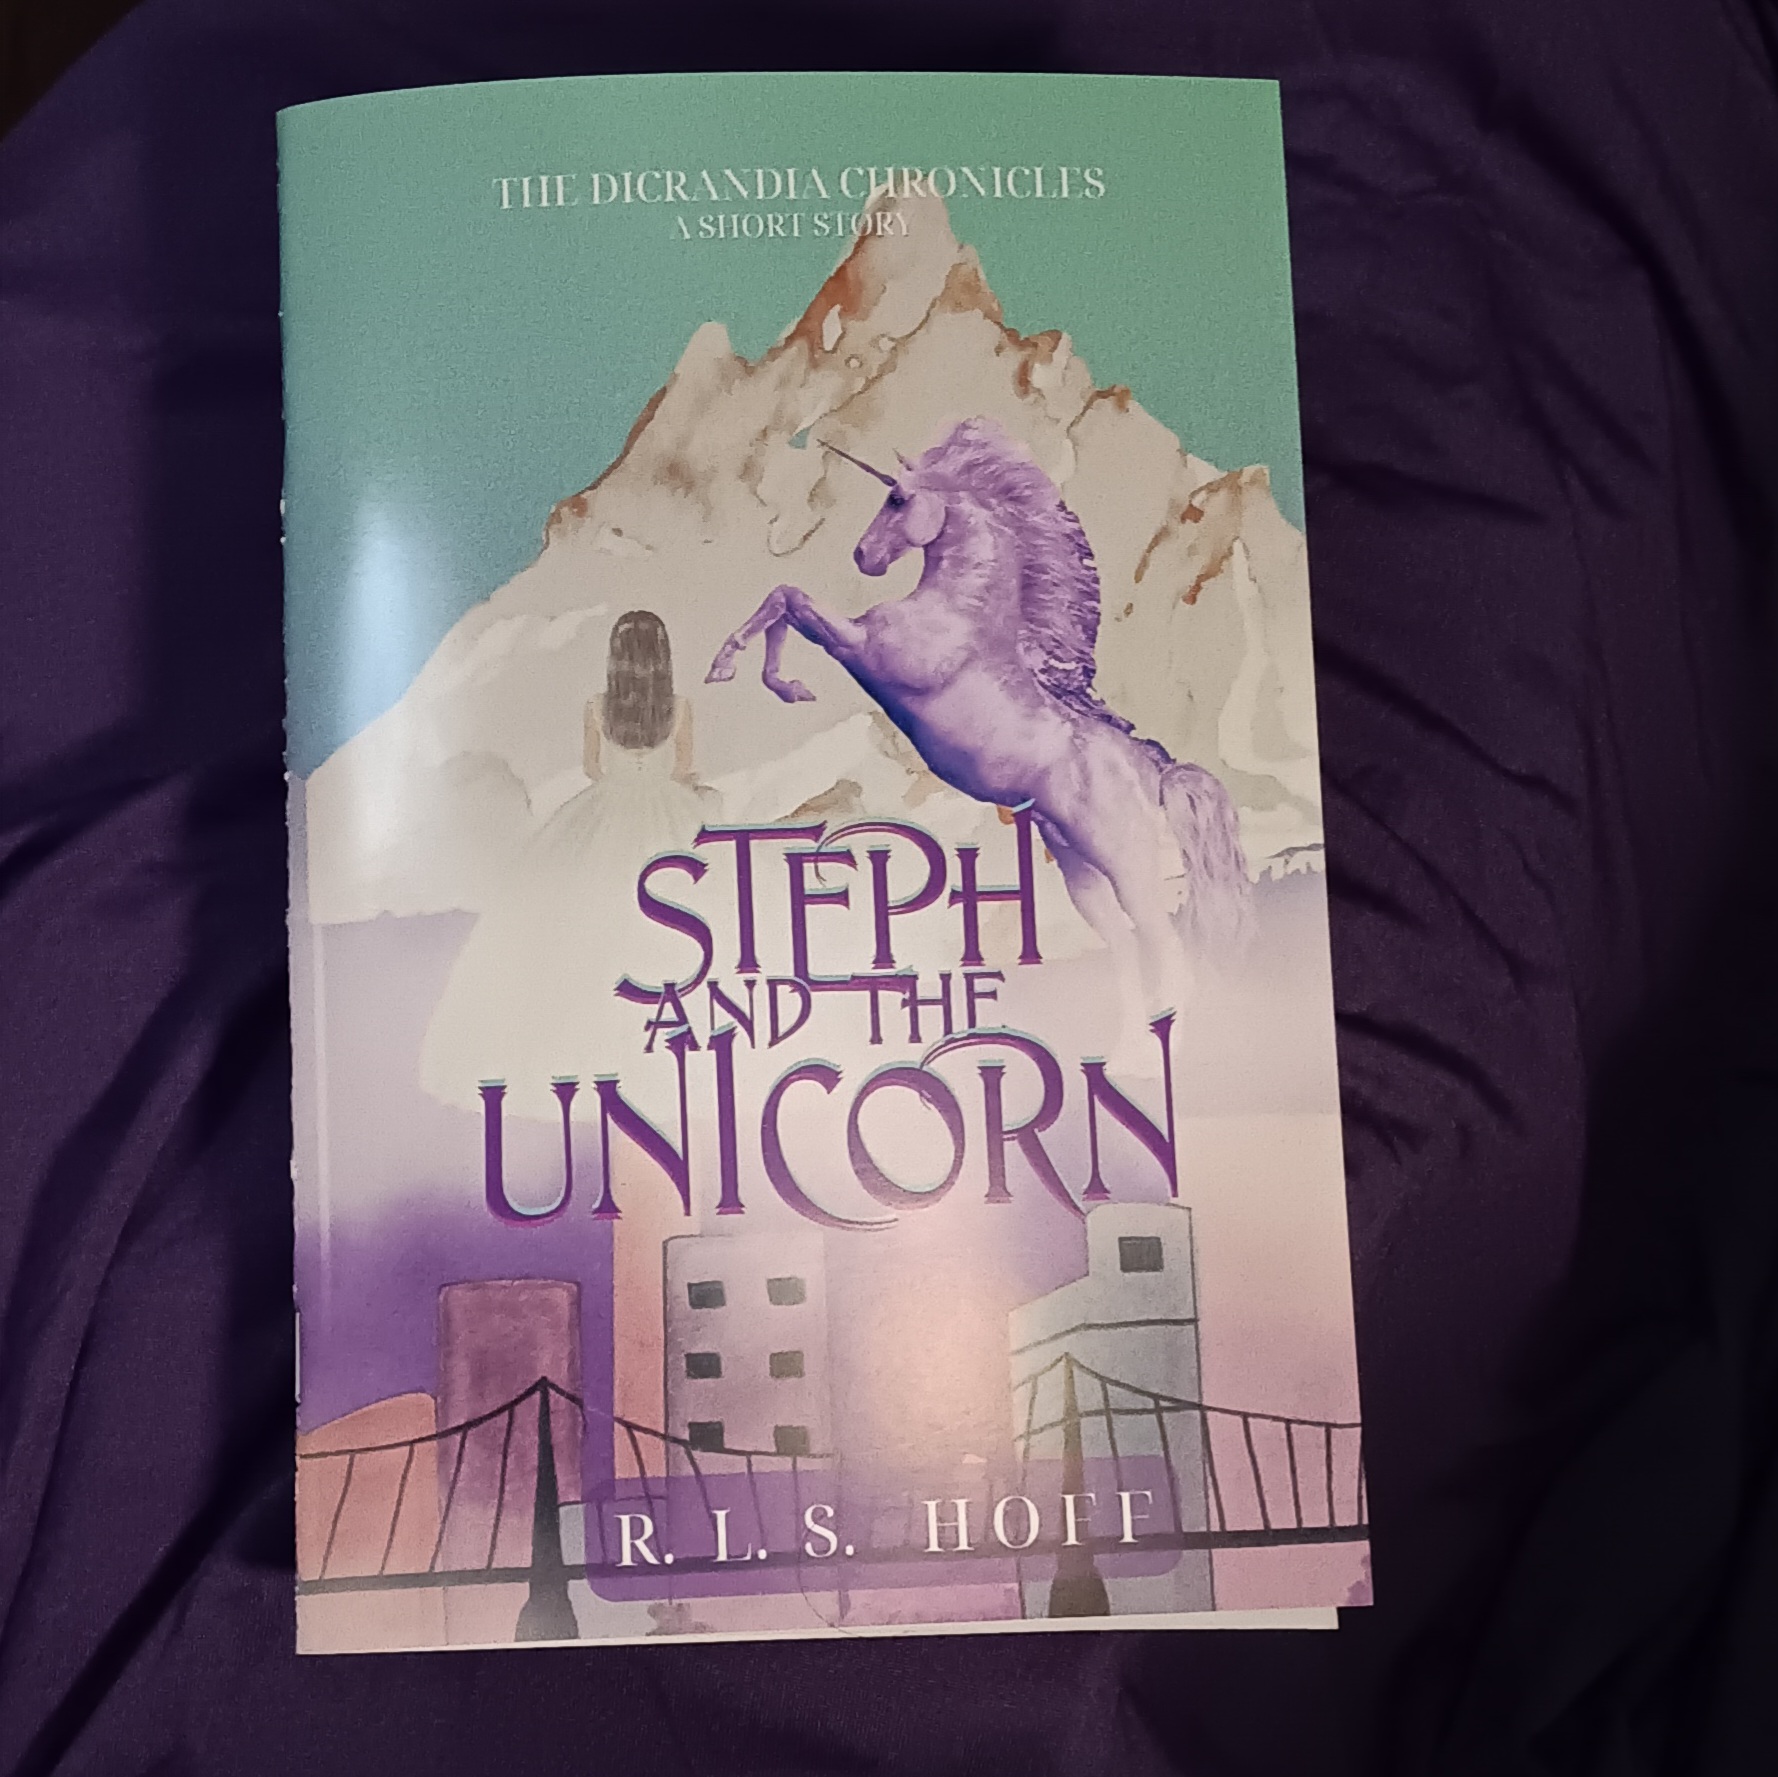 A glossy bound zine copy of Steph and the Unicorn sits on a purple background.